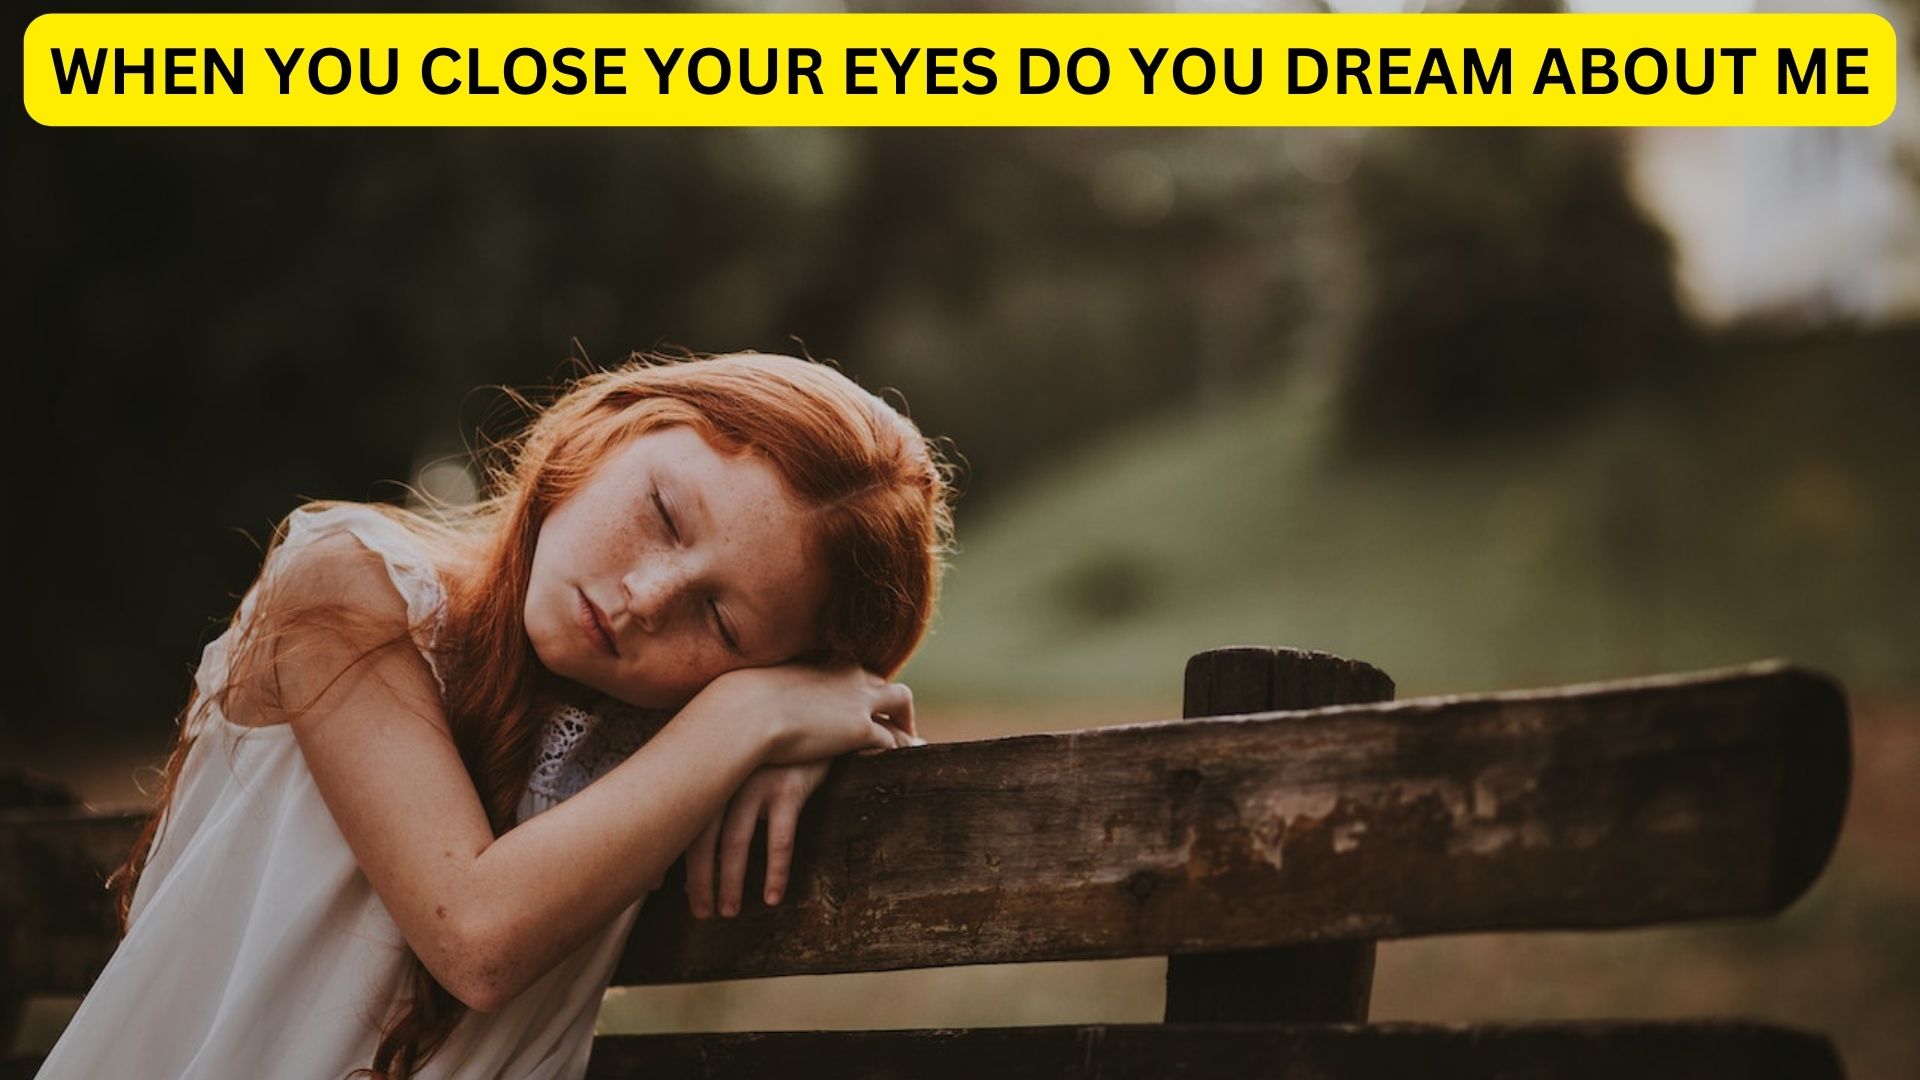 When You Close Your Eyes, Do You Dream About Me?